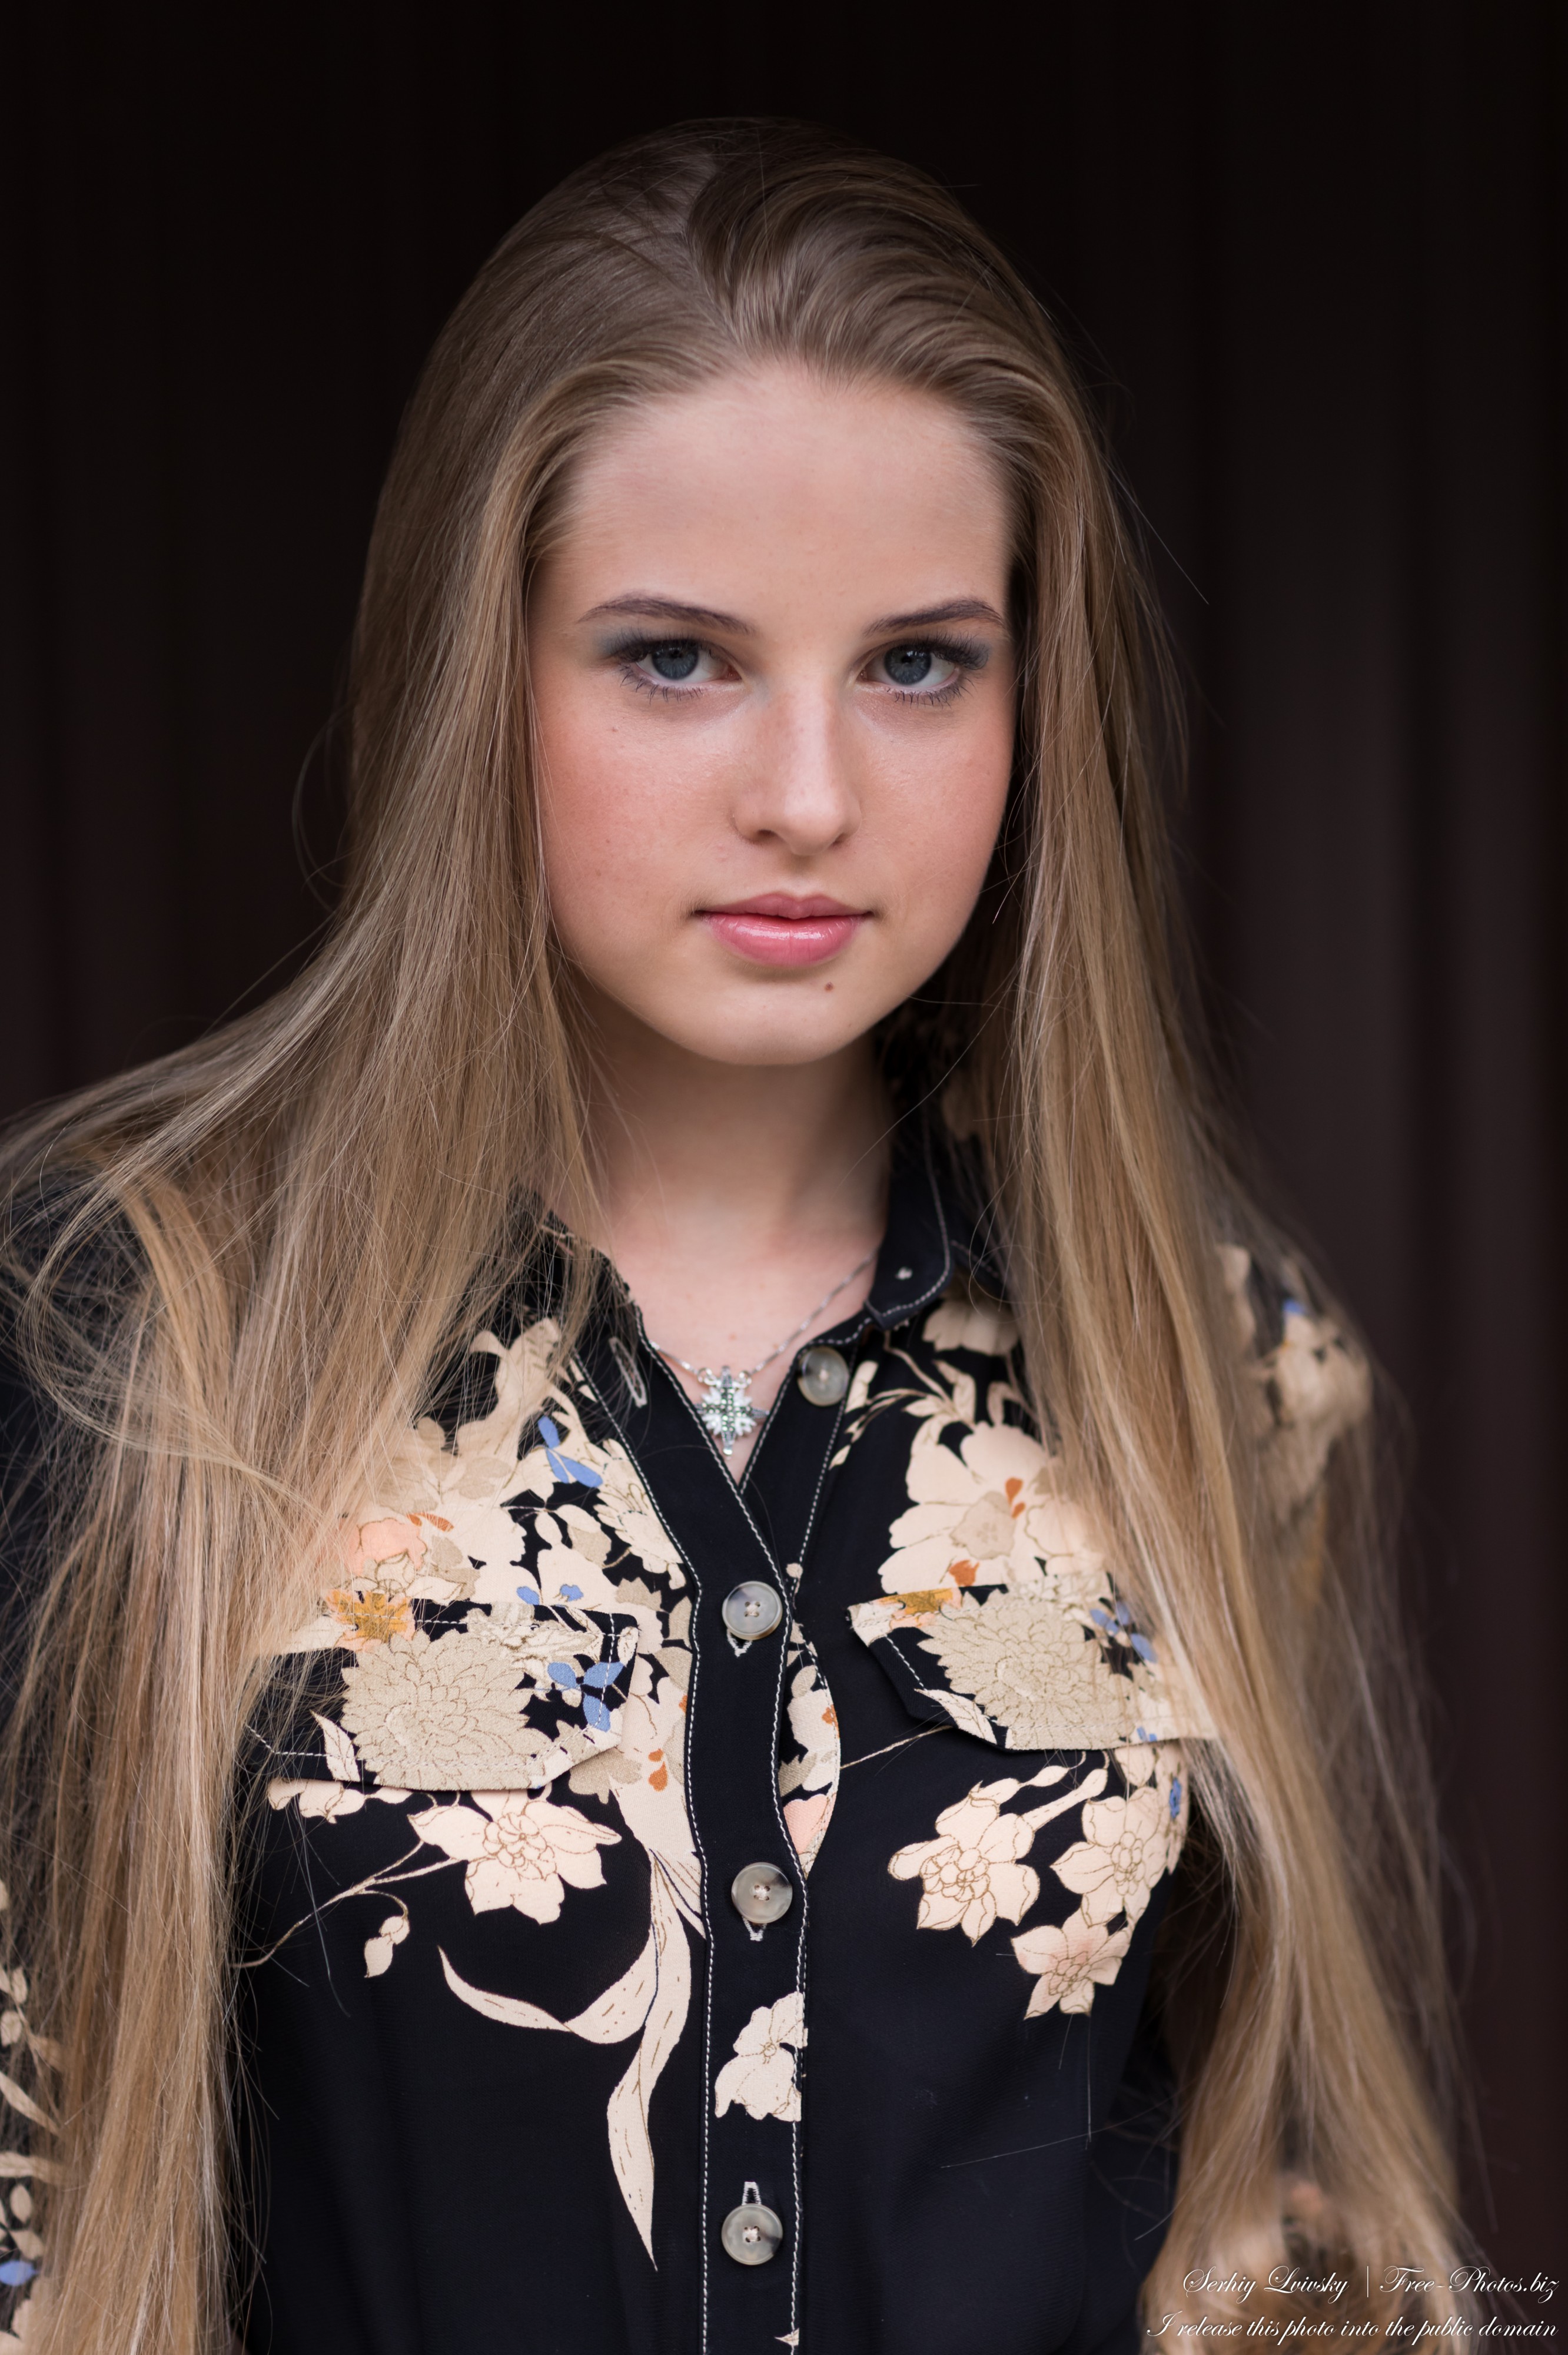 Photo Of Diana An 18 Year Old Natural Blonde Girl Photographed In August 2020 By Serhiy